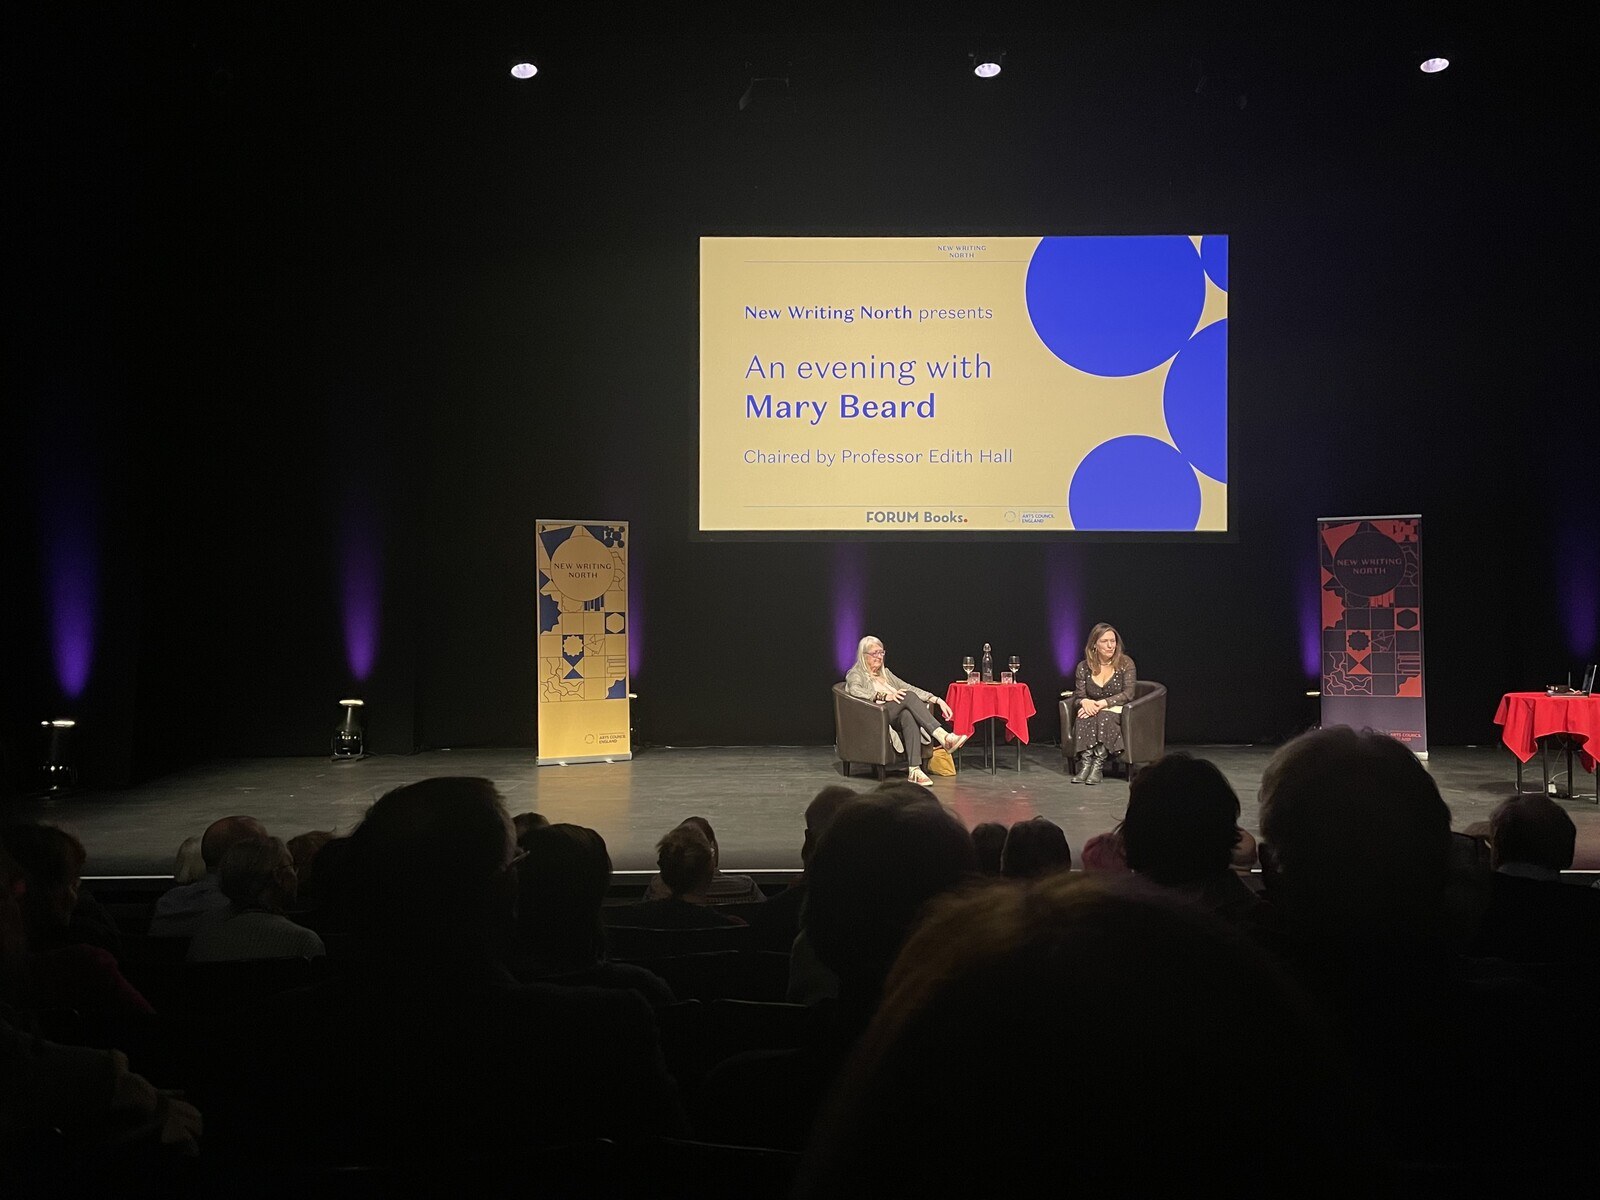 Mary Beard and her interviewer on stage in front of a sign reading "An evening with Mary Beard"